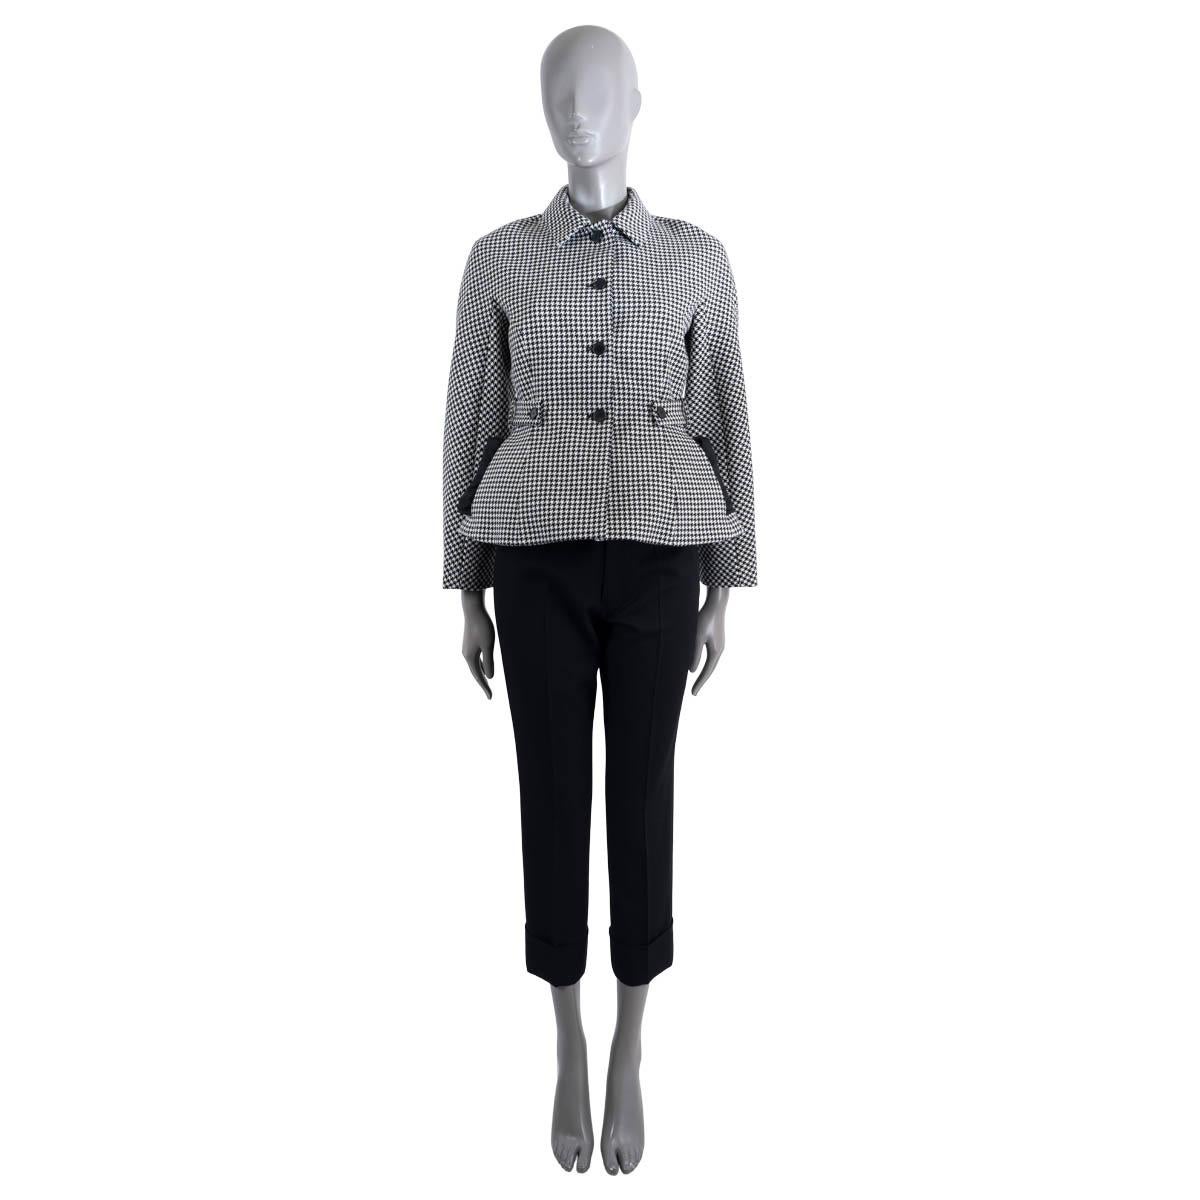 100% authentic Christian Dior houndstooth jacket in black and white wool (with 3% polyamide). Features black quilted silk patch pockets at the waist, a matching buttoned back belt and raglan sleeves (sleeve measurement taken from the neck). Closes